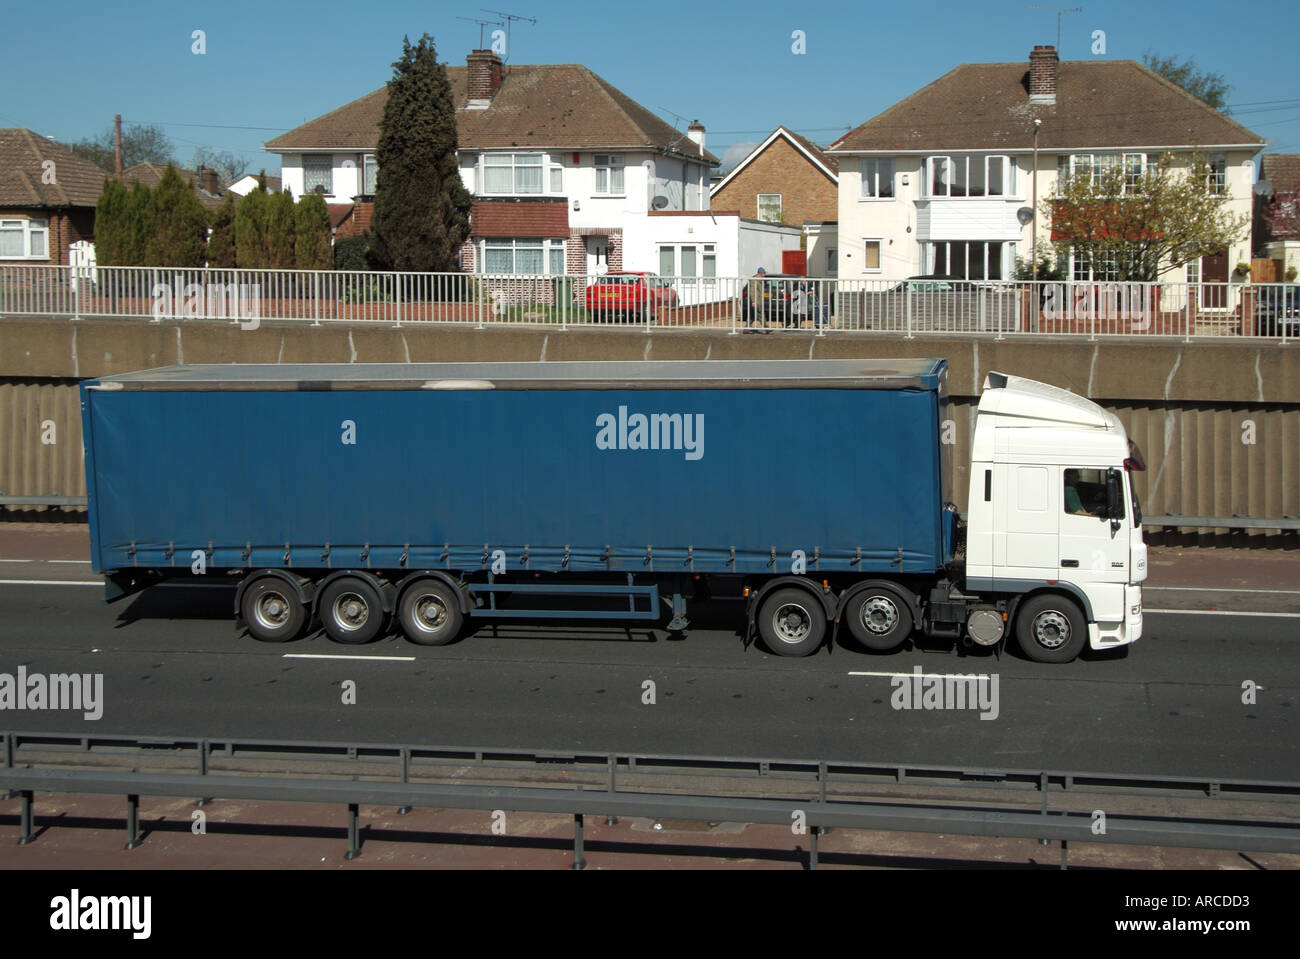 Unmarked lorry truck dual carriageway A12 trunk road close to residential homes suffering noise & air pollution from heavy traffic Essex England UK Stock Photo